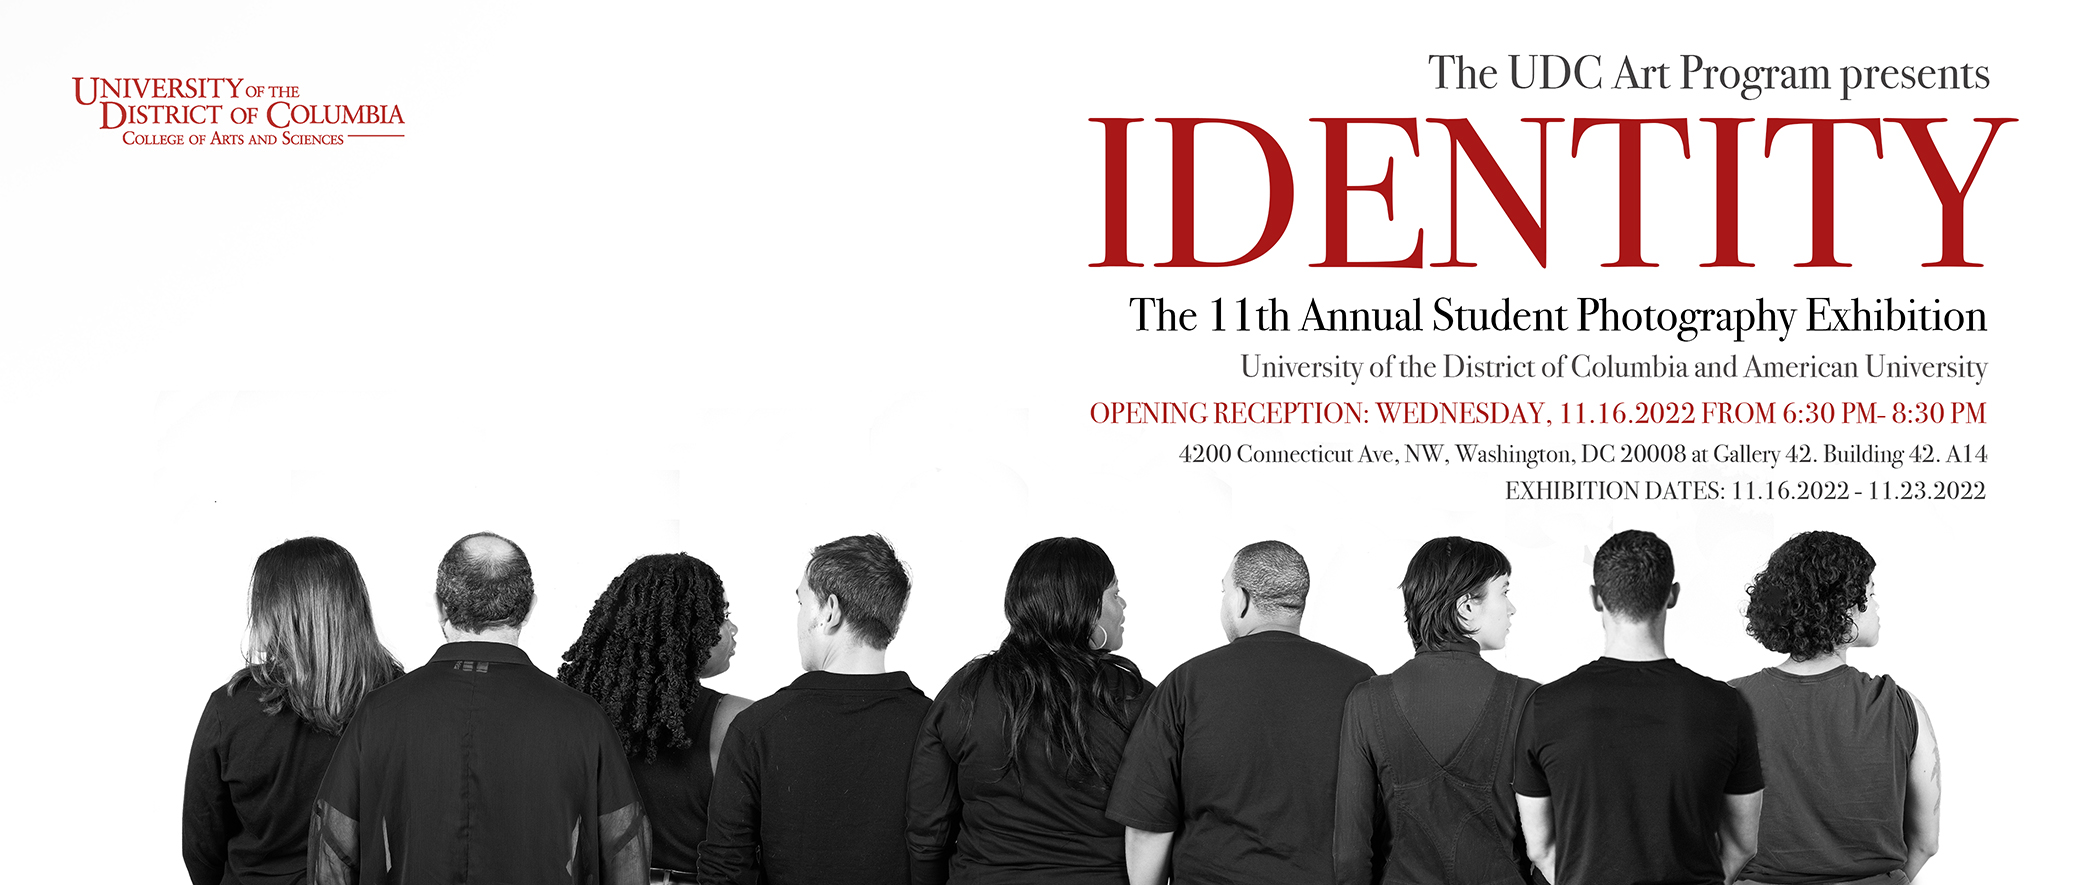 The UDC Art Program presents IDENTITY The 11th Annual Student Photography Exhibition University of the District of Columbia and American University OPENING RECEPTION: WEDNESDAY, 11.16.2022 FROM 6:30 PM- 8:30 PM 4200 Connecticut Ave, NW, Washington, DC 20008 at Gallery 42. Building 42. A14 EXHIBITION DATES: 11.16.2022 - 11.23.2022